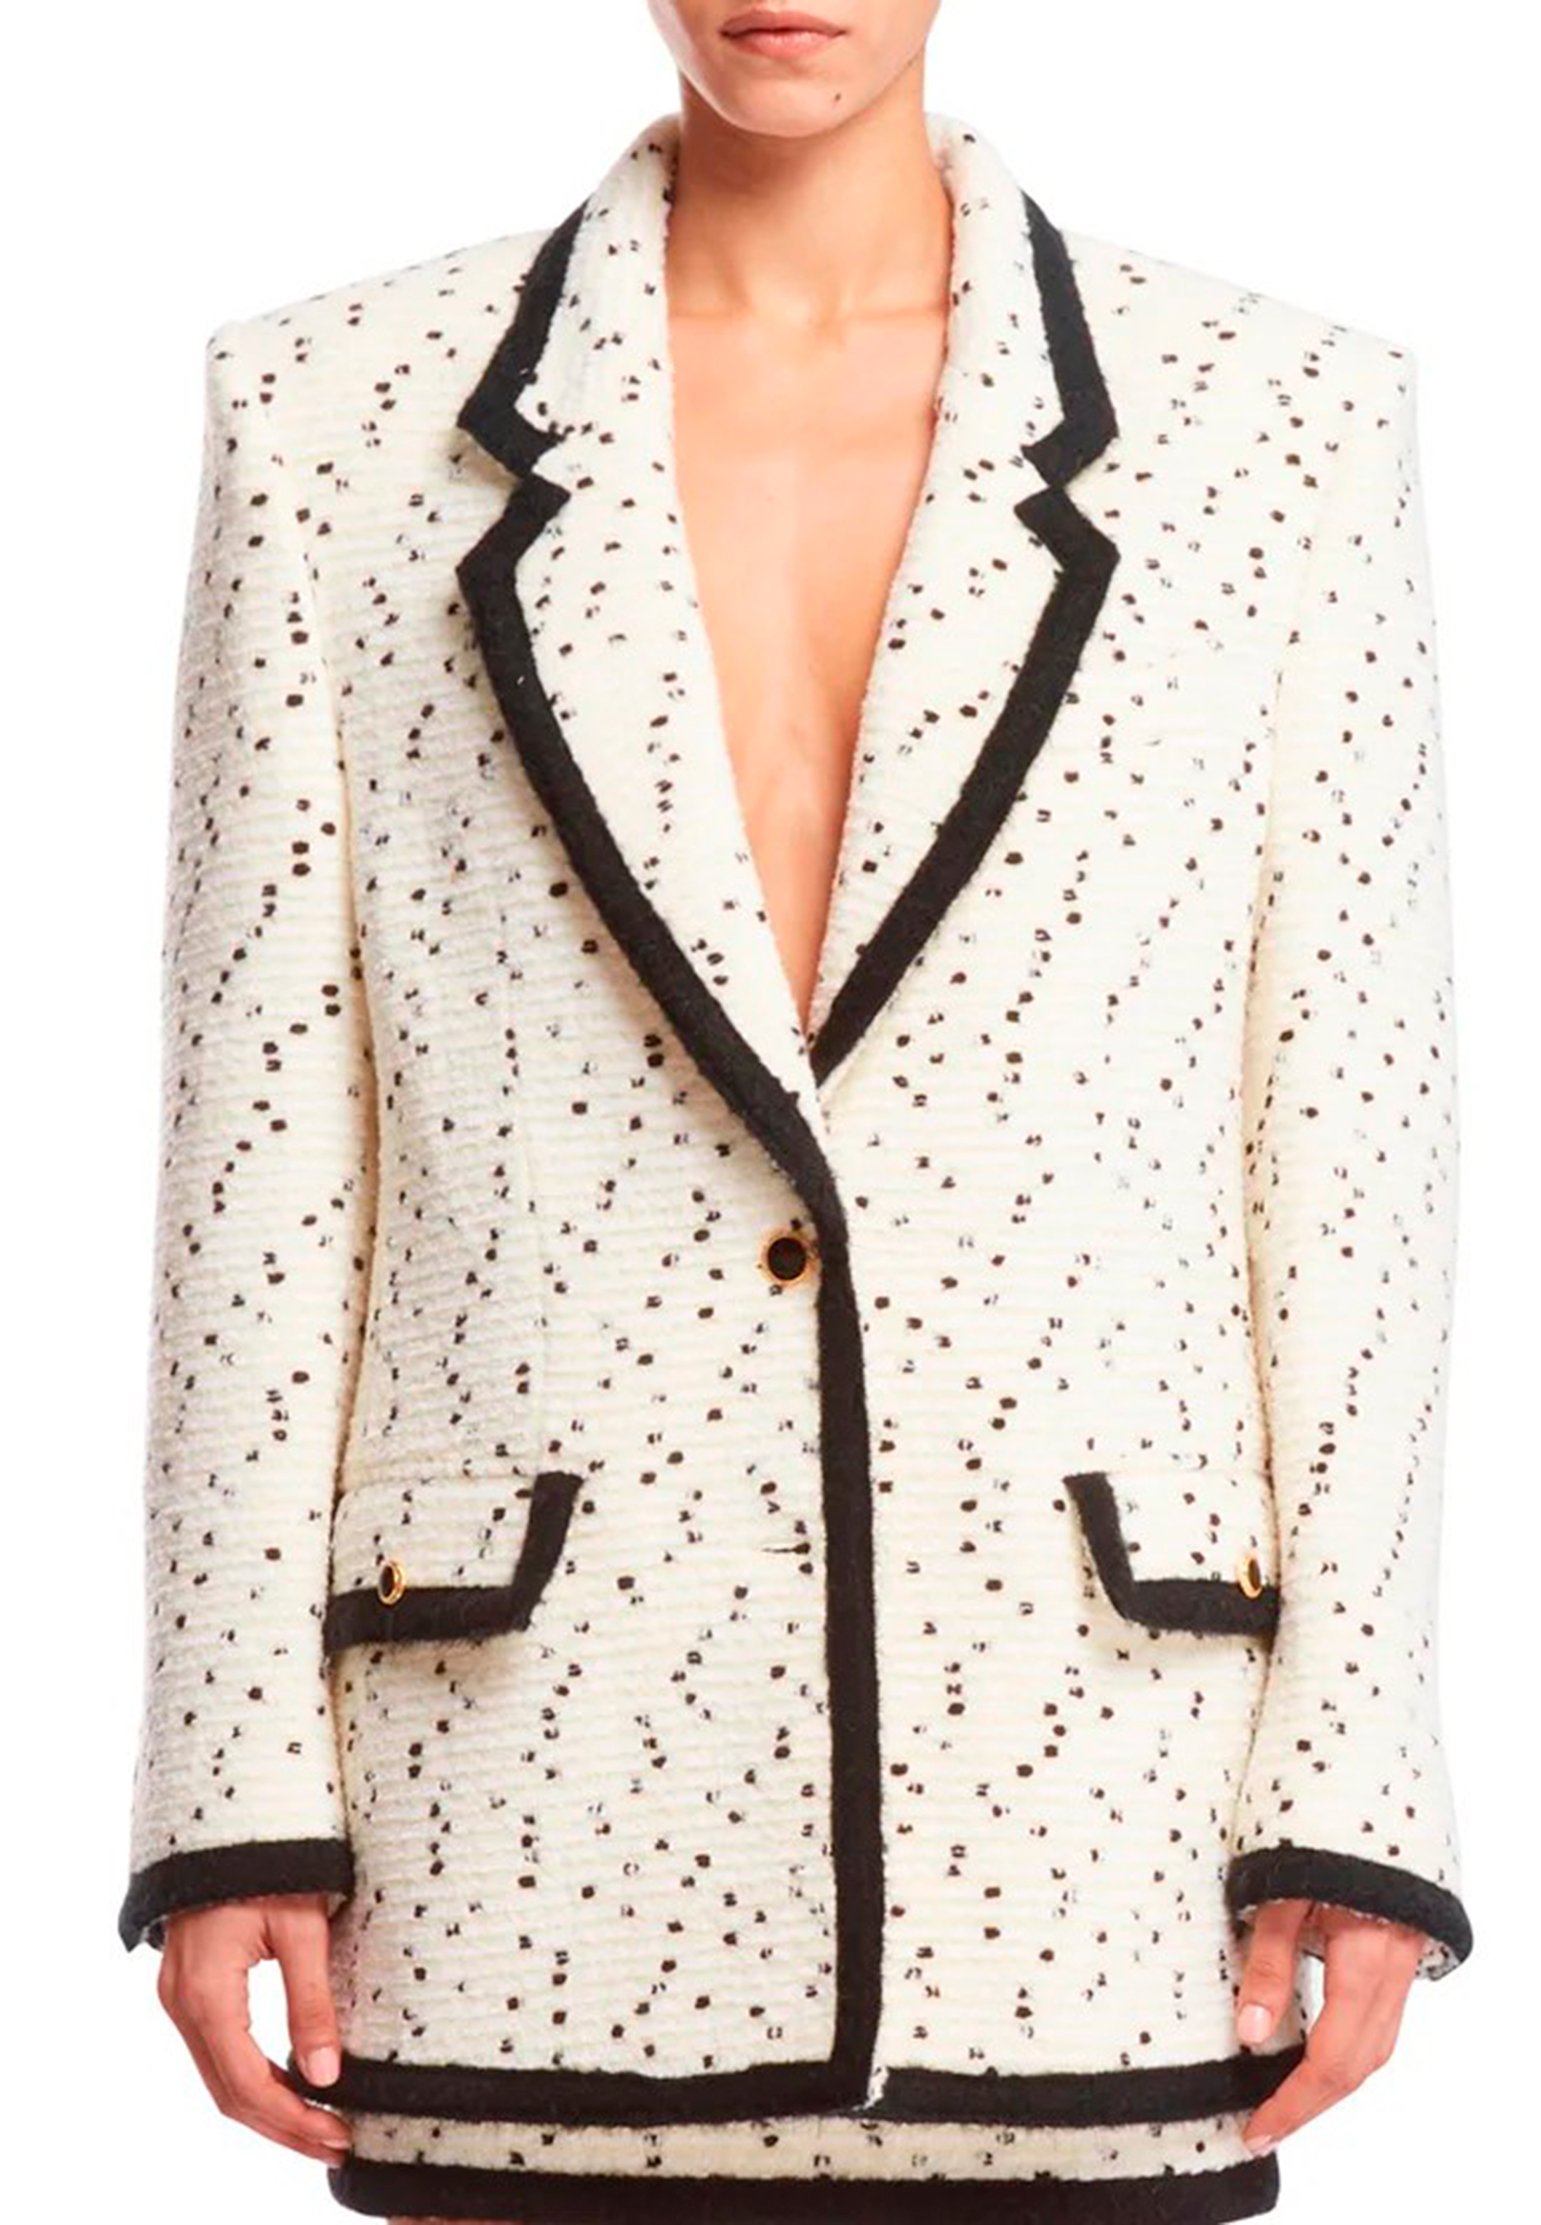 Jacket ALESSANDRA RICH Color: ivory (Code: 2657) in online store Allure